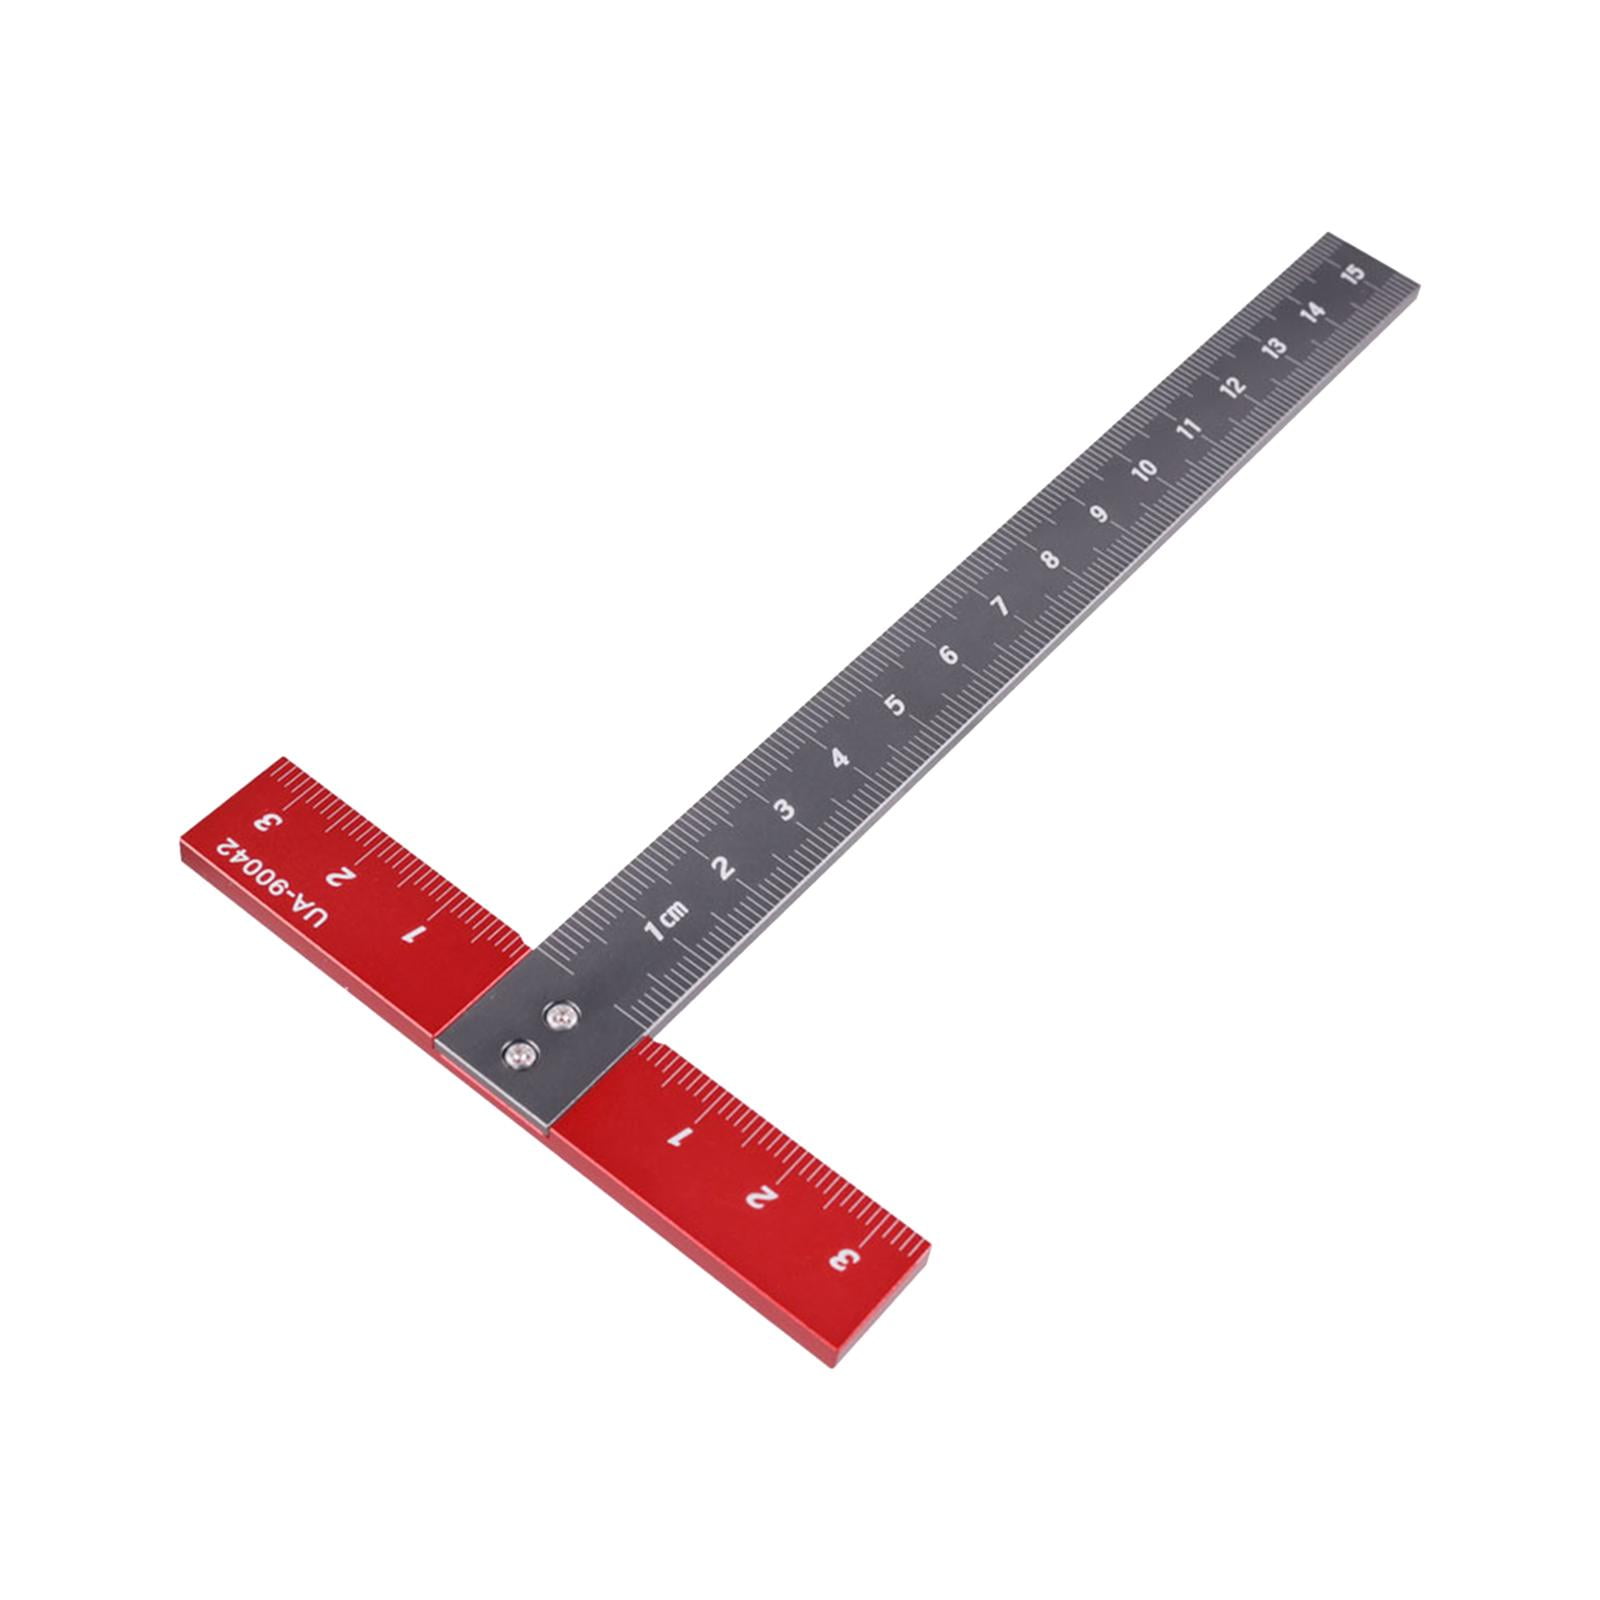 Wooden T-Square Ruler for Sale ✔️ Lowest Price Guaranteed